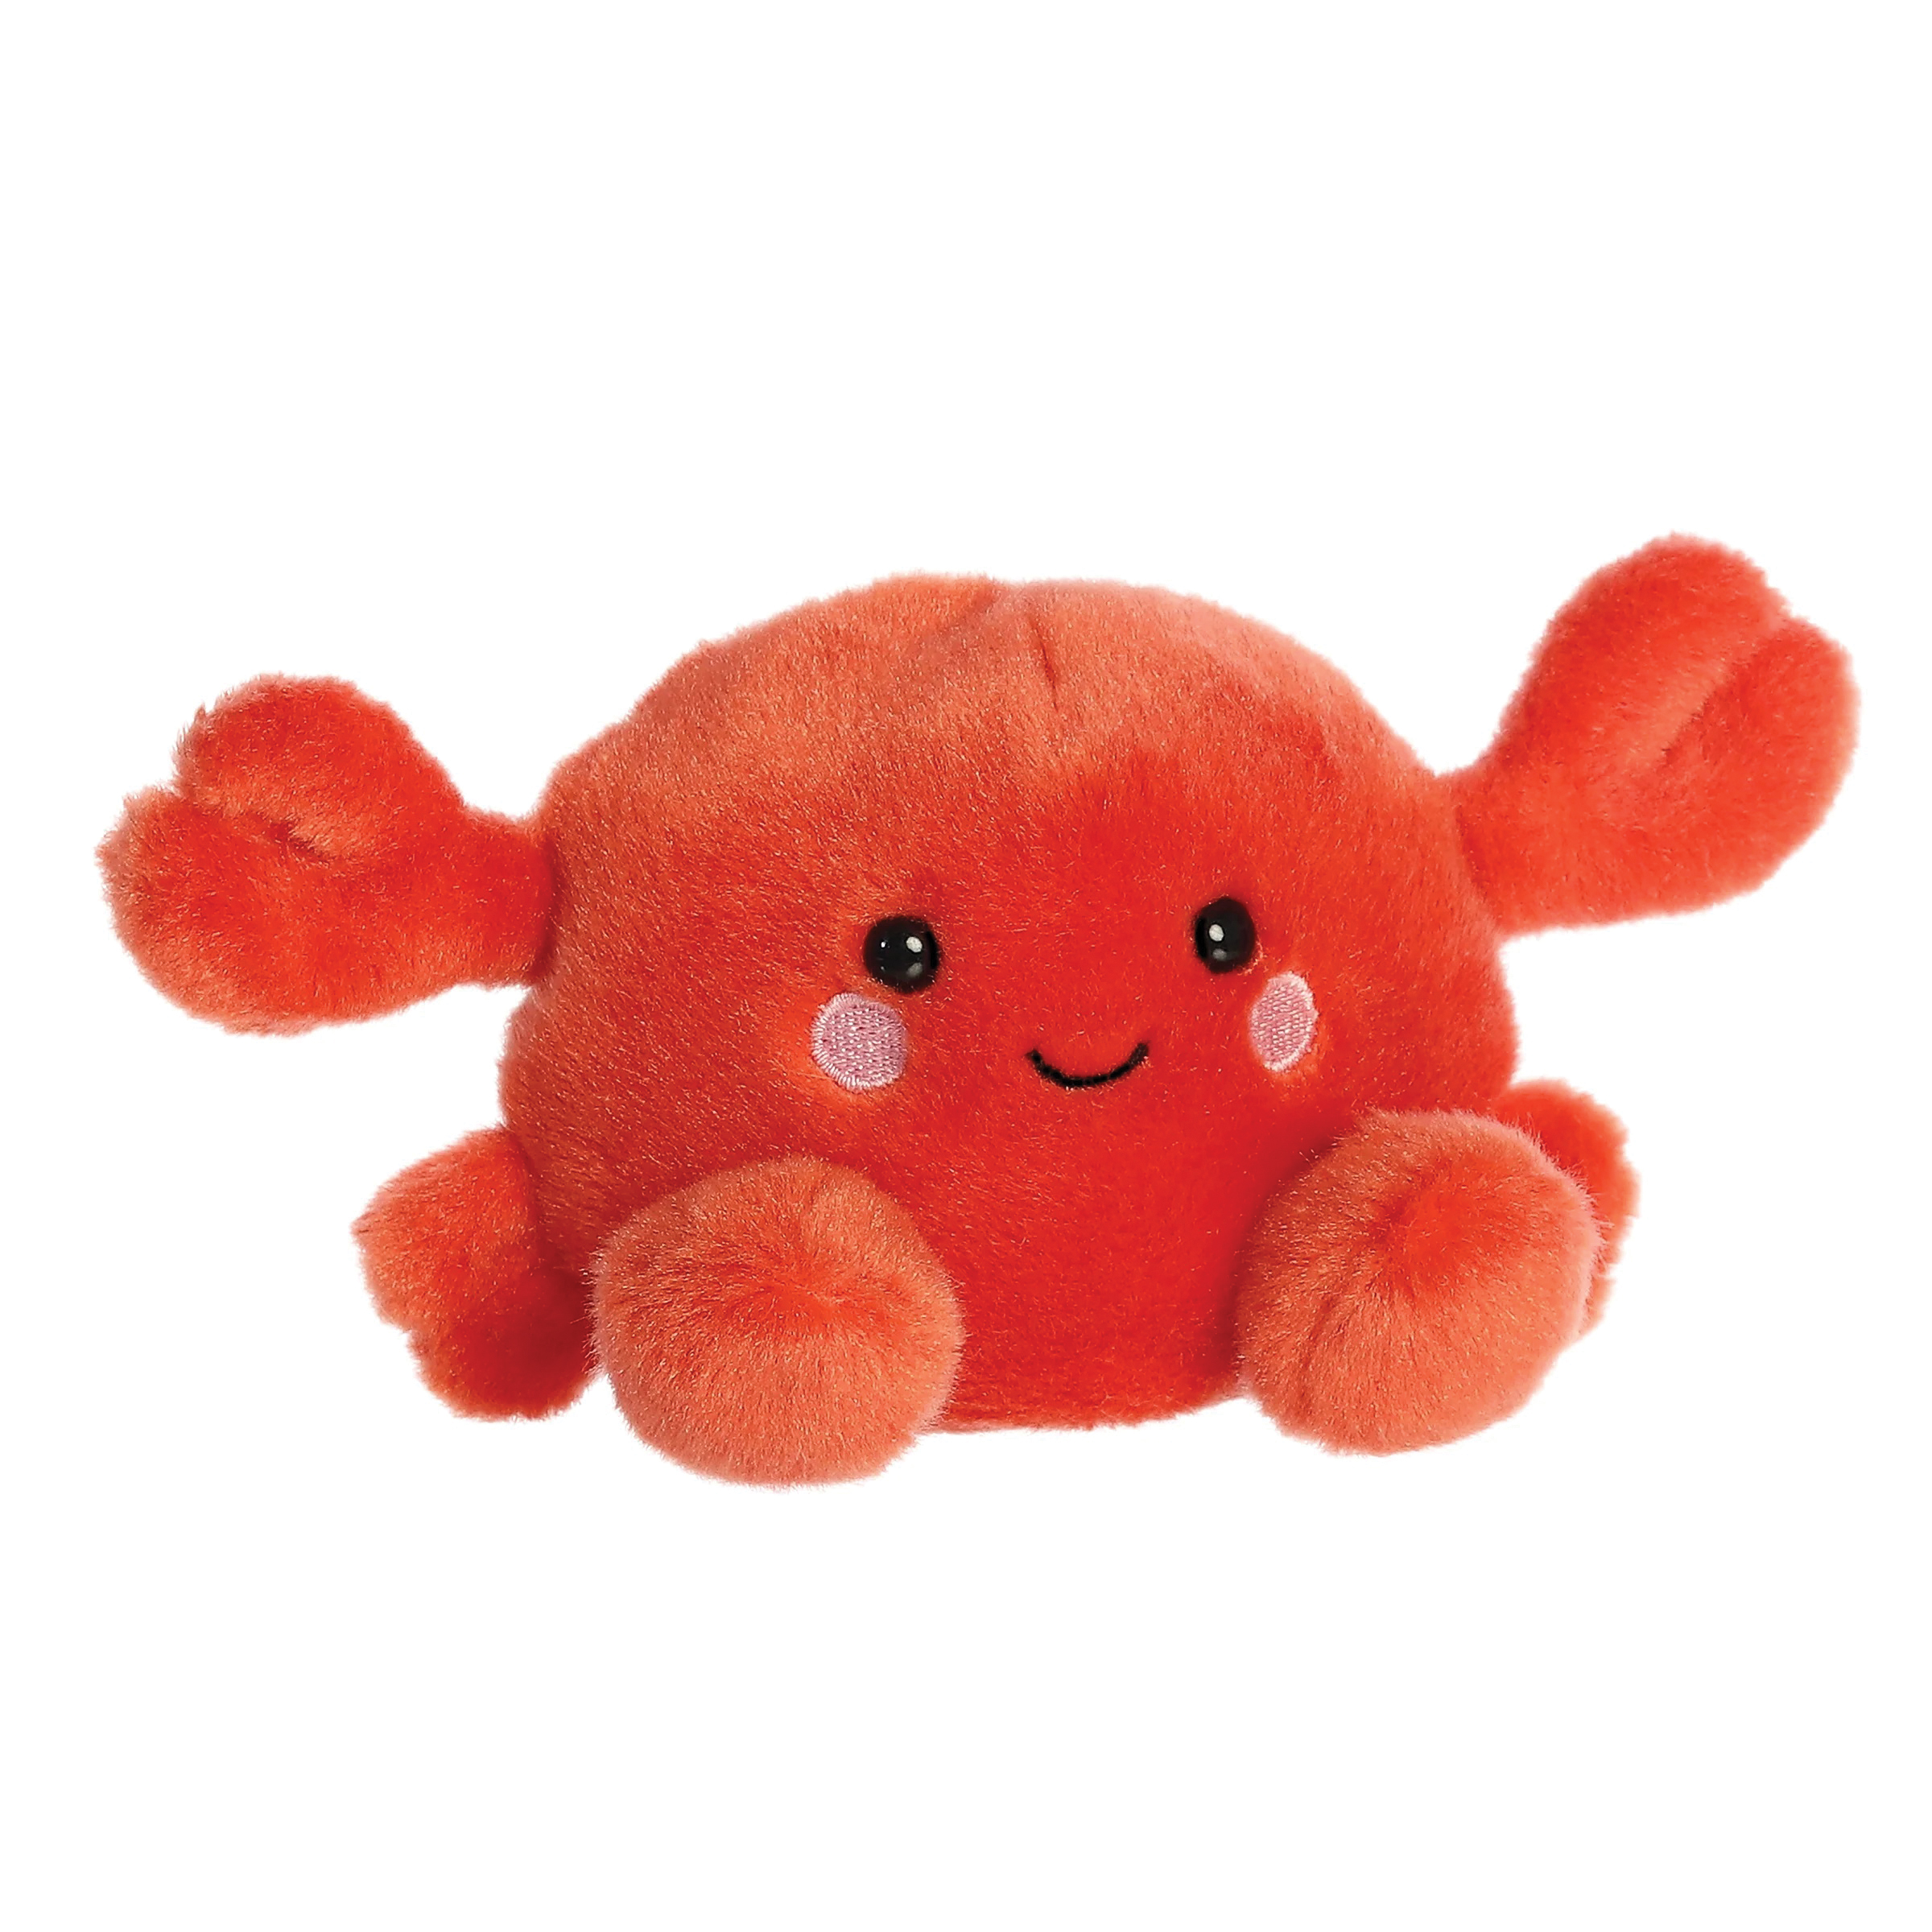 Aurora Palm Pals Series 33680 Snippy Crab Toy, All, Plush, Red - 2